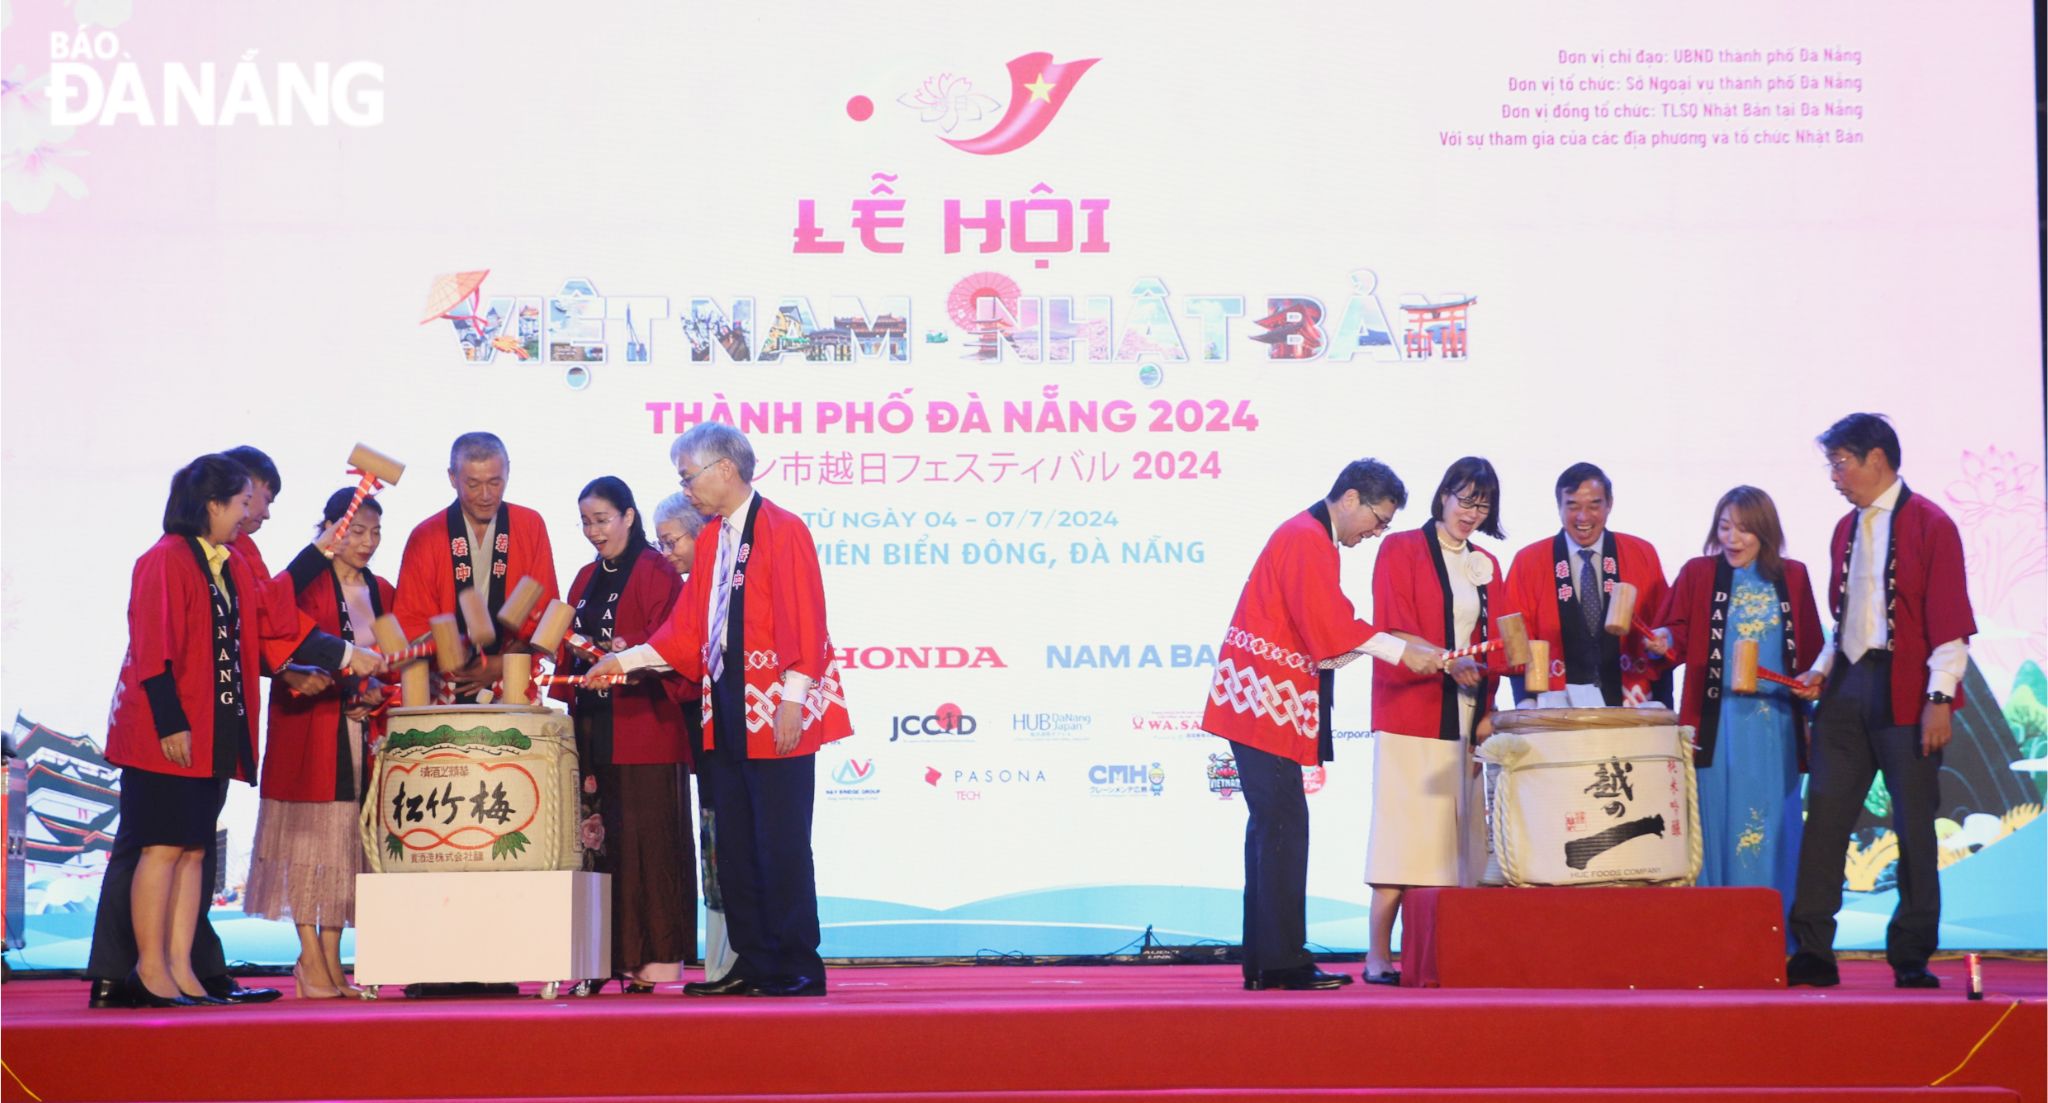 Da Nang actively contributes to the development of Viet Nam - Japan relations